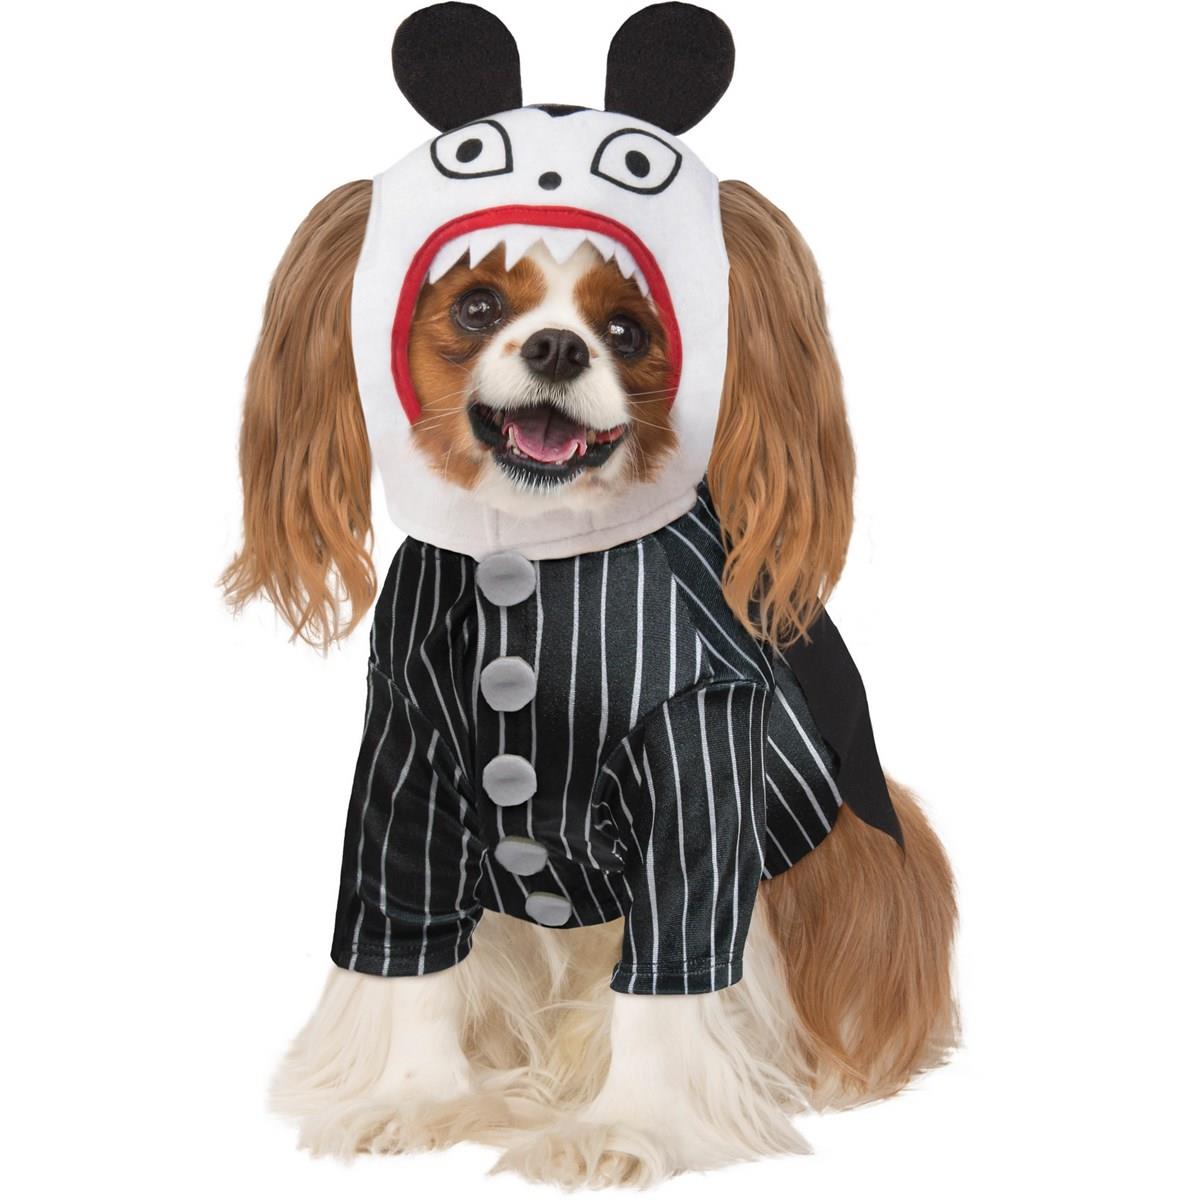 283947 Scary Teddy Pet Costume, Small 11